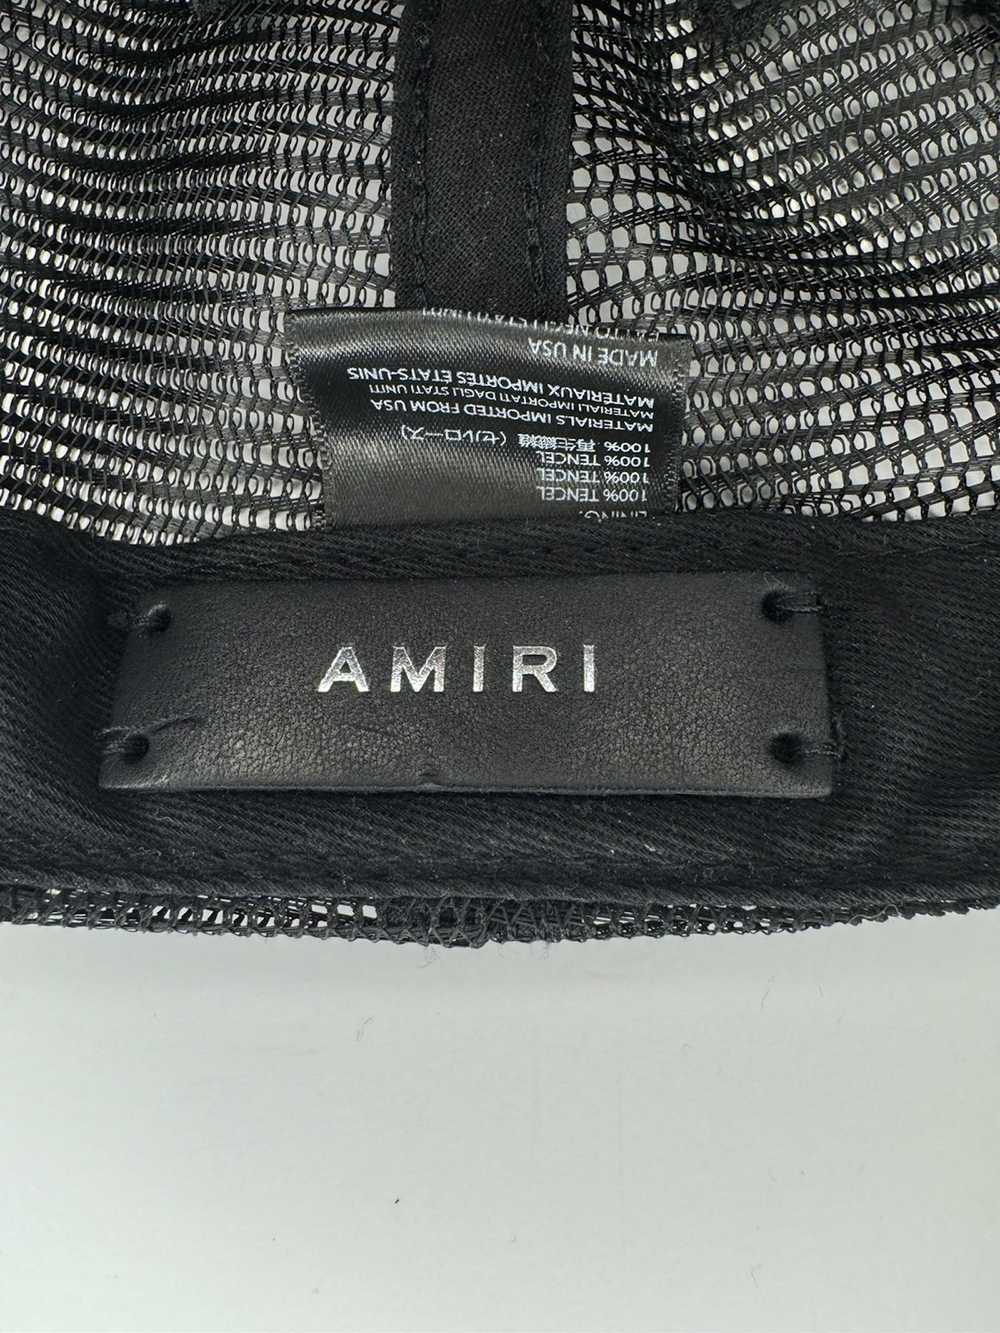 Amiri Amiri Exclusive Beverly Hills Hat SOLD OUT - image 3